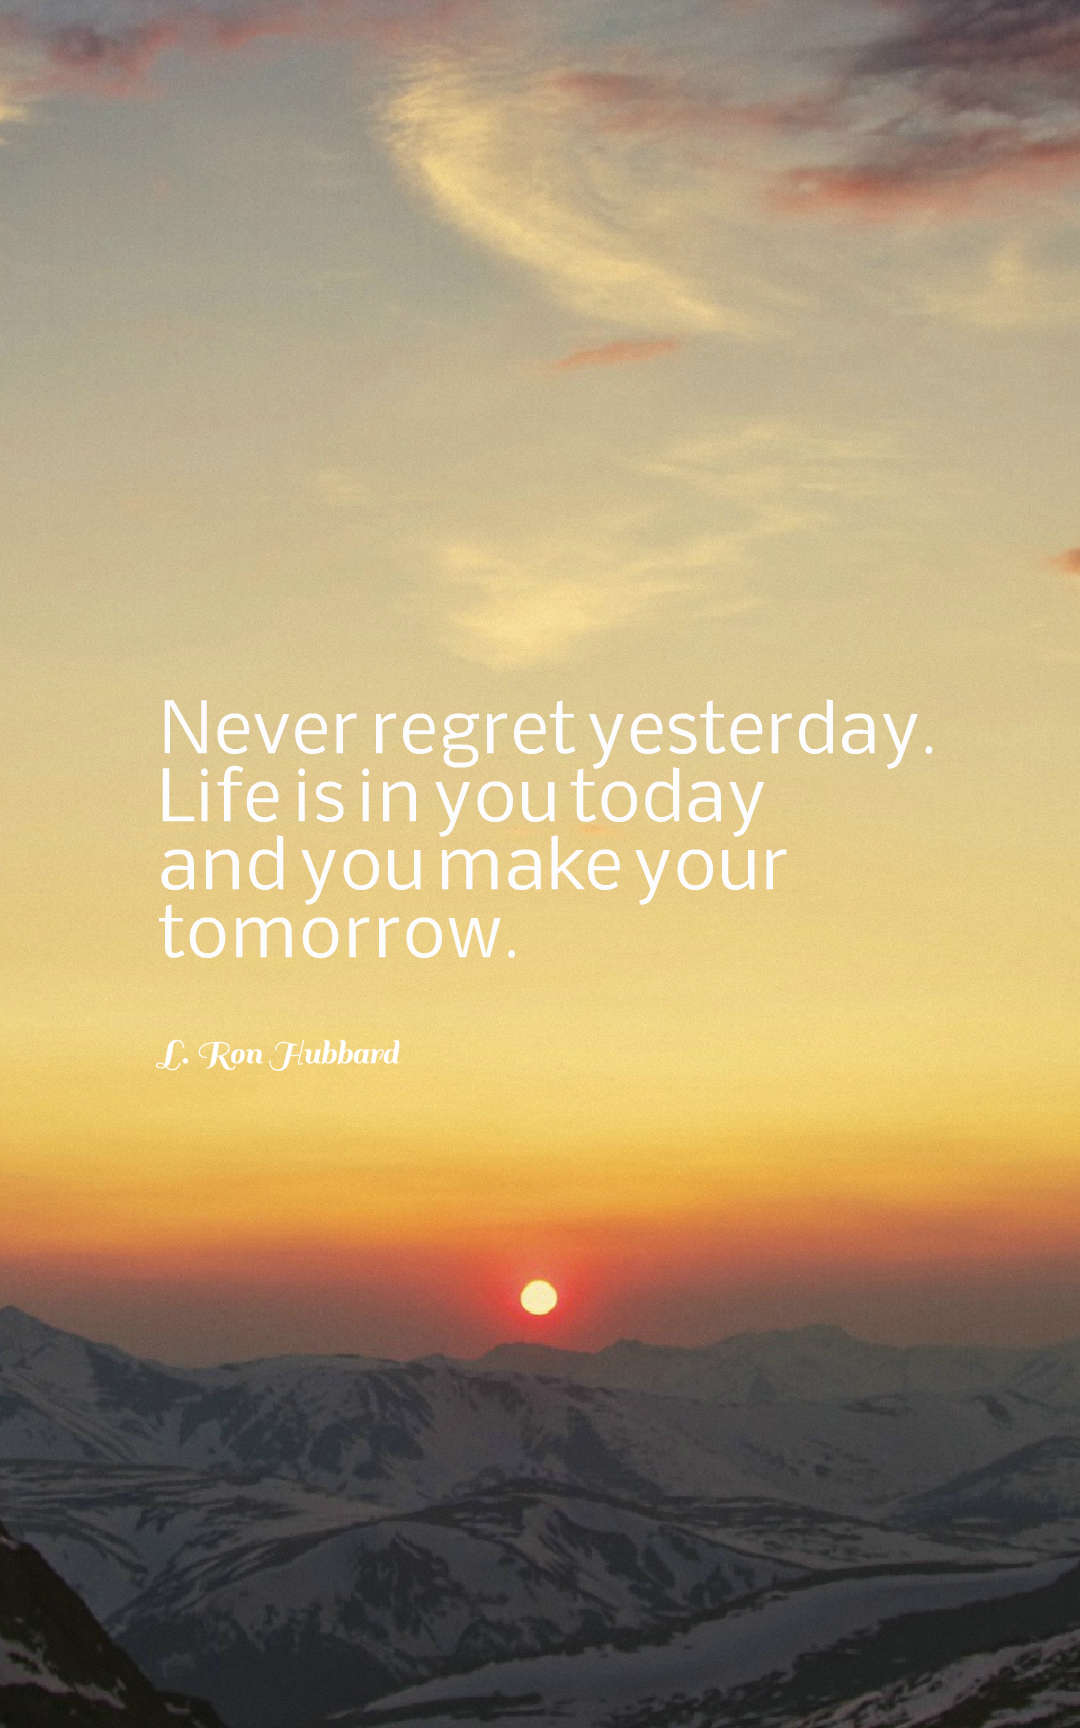 Never regret yesterday. Life is in you today and you make your tomorrow.